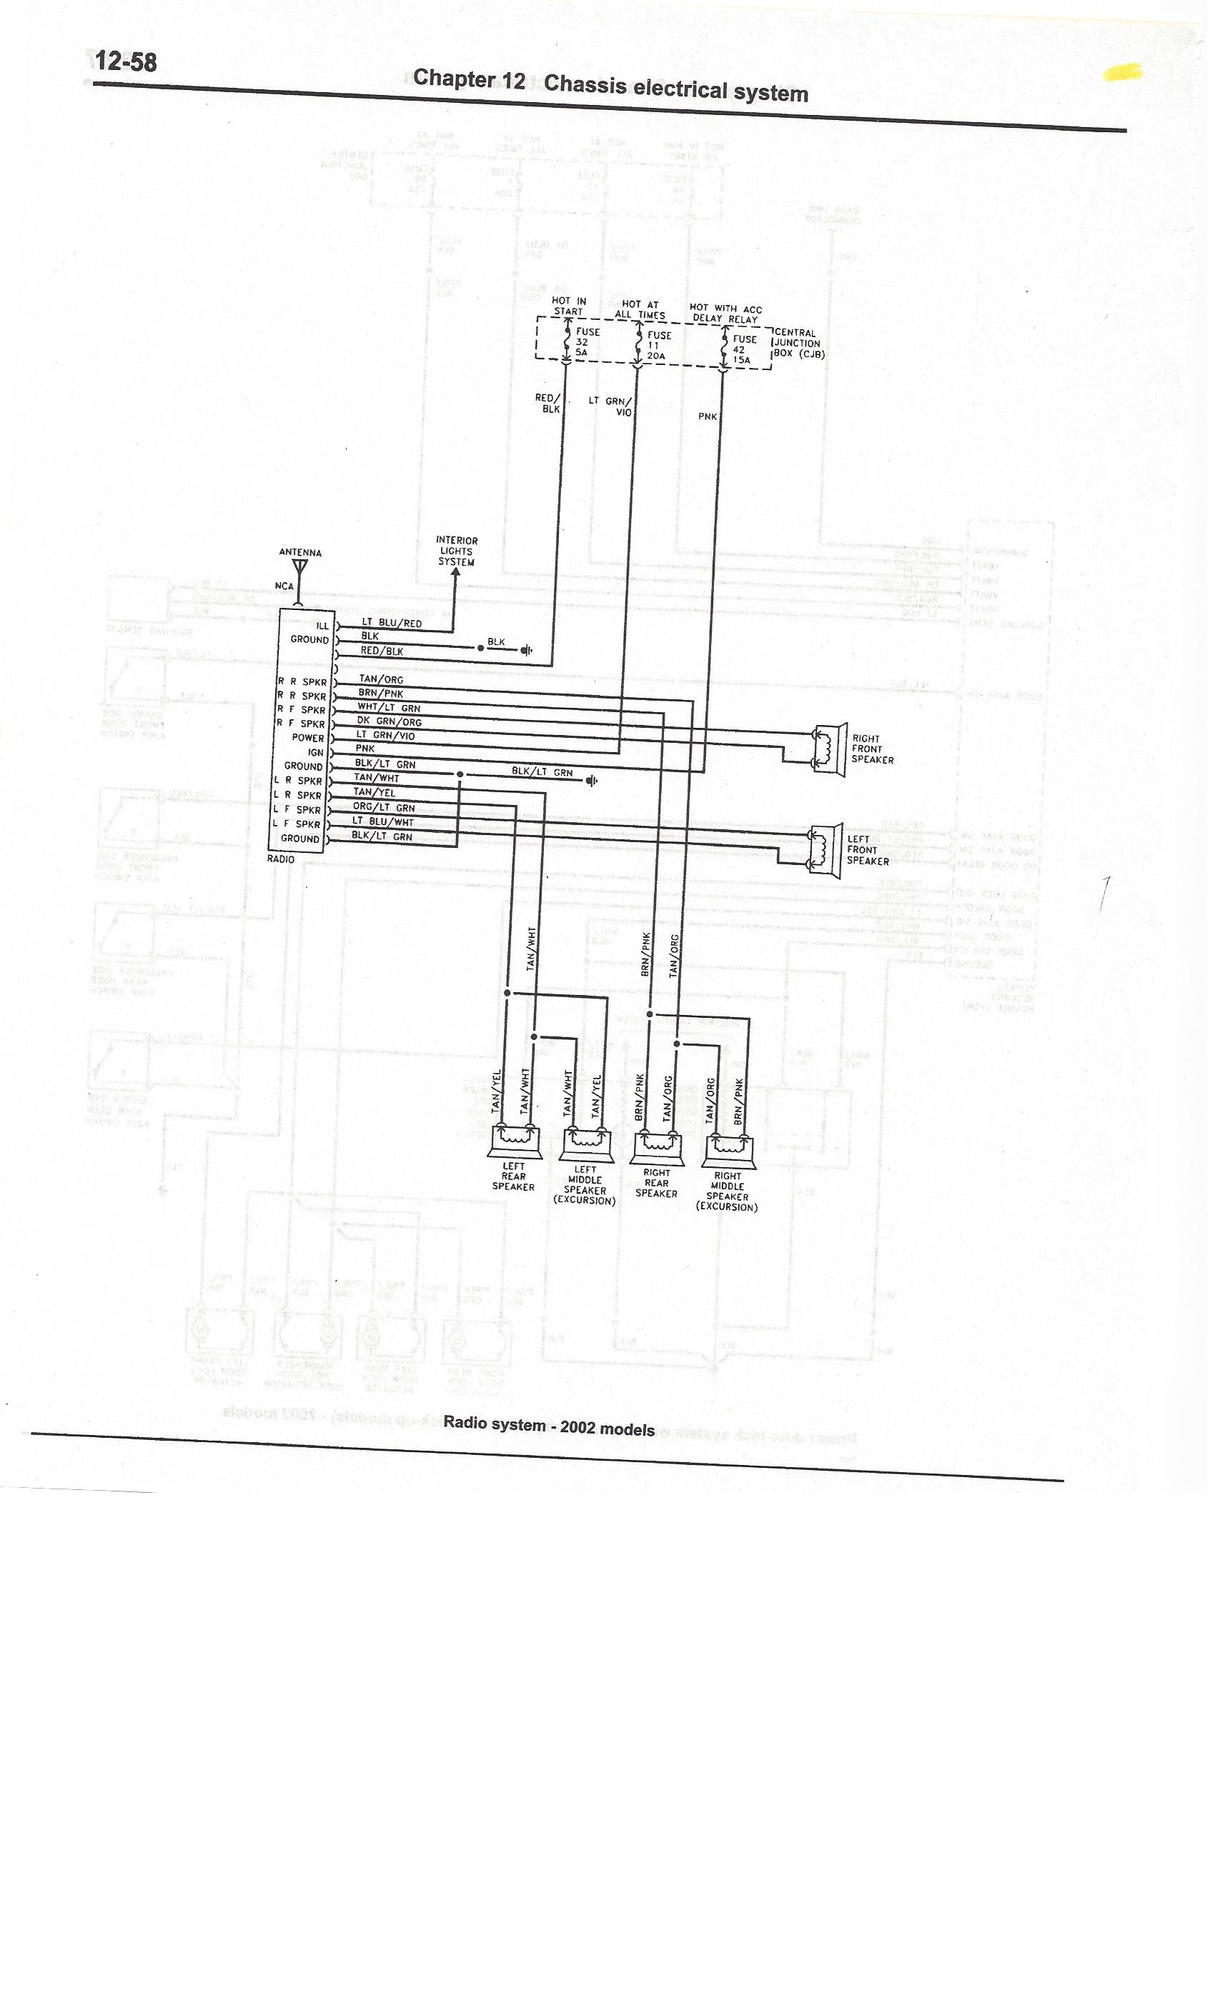 Complete Excursion Wiring Diagrams so far - Page 2 - Ford Truck